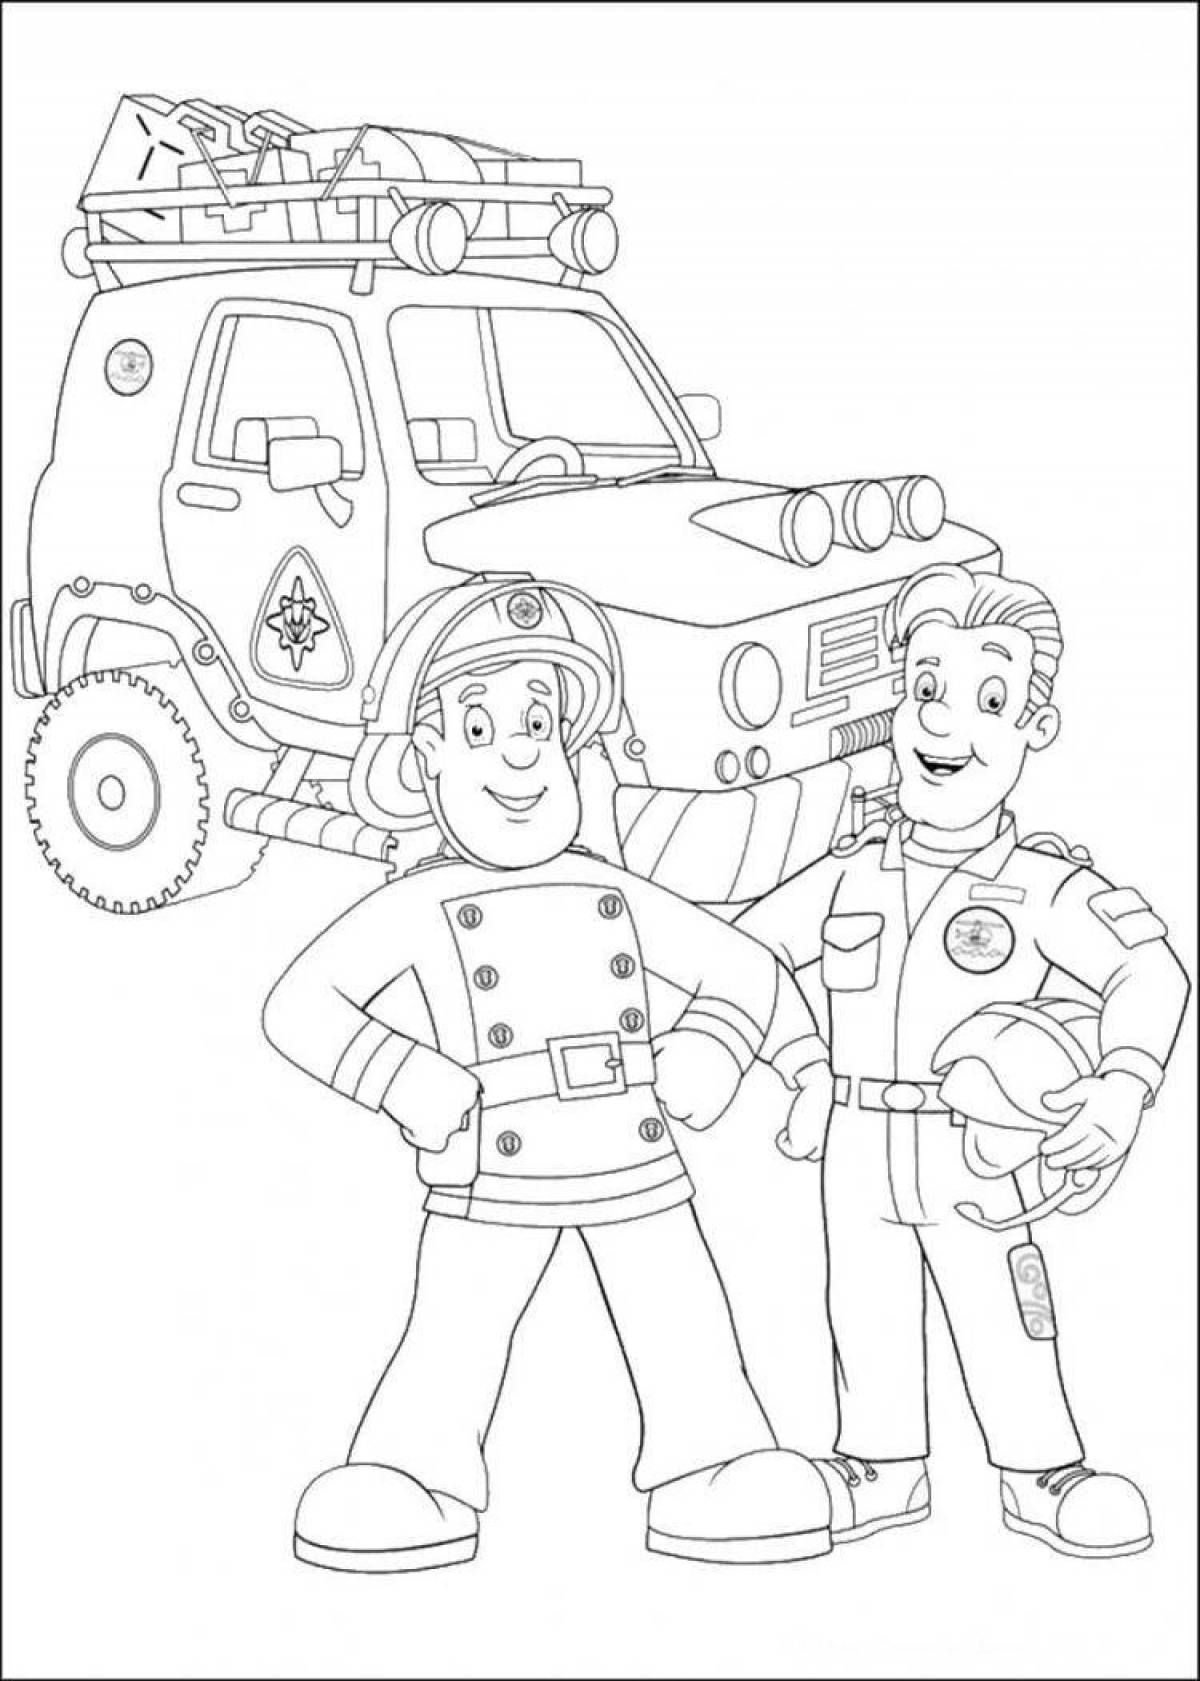 Rescue Engagement Coloring Page